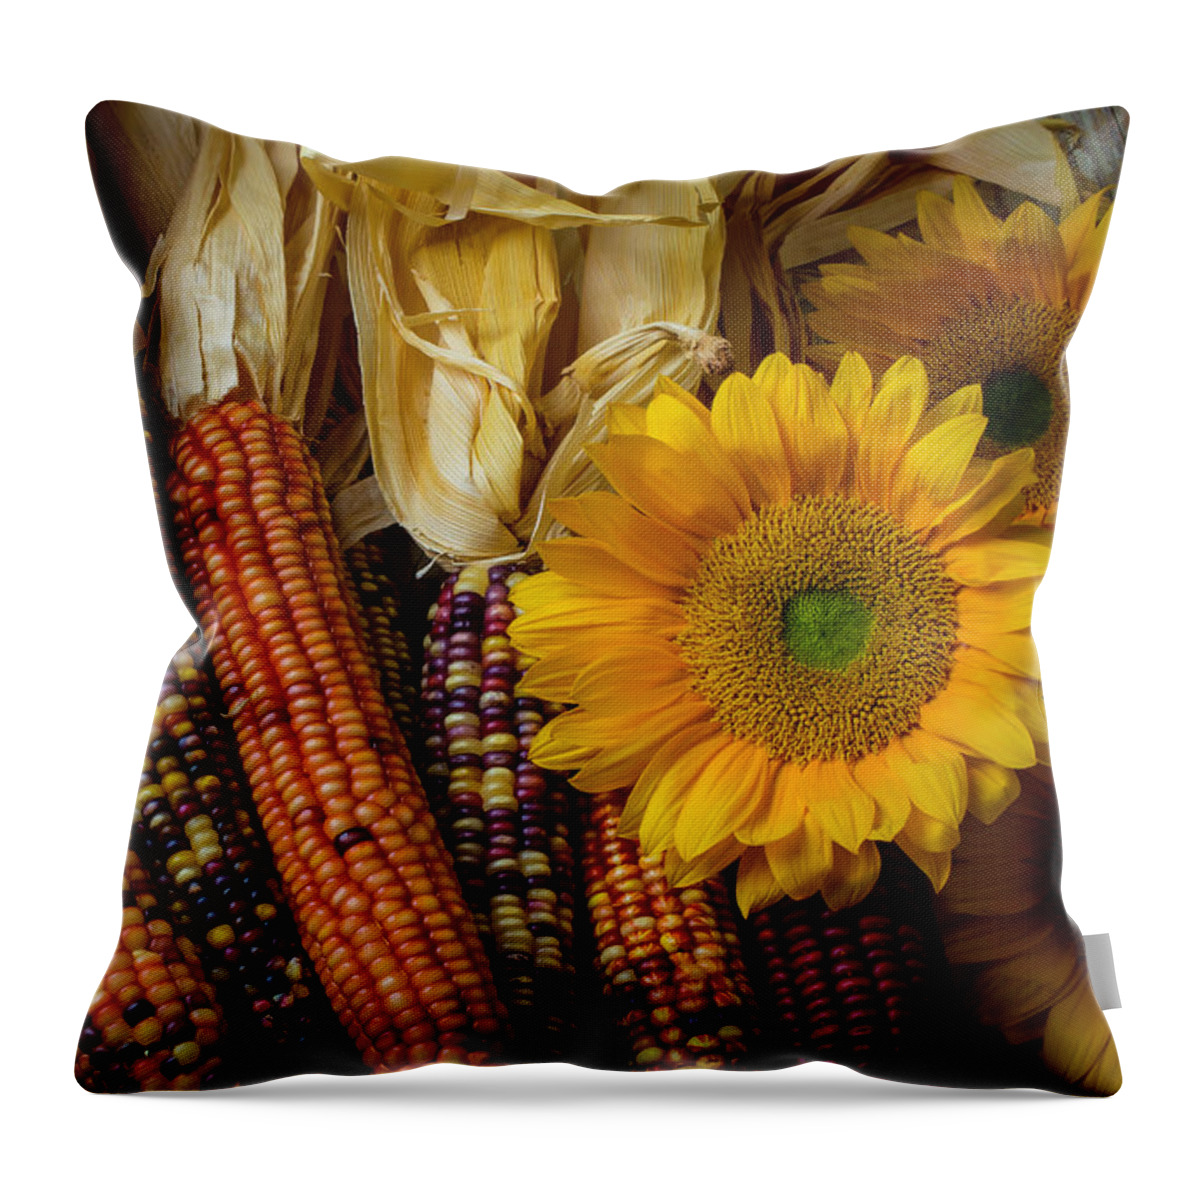 Indian Throw Pillow featuring the photograph Indian Corn And Sunflowers by Garry Gay